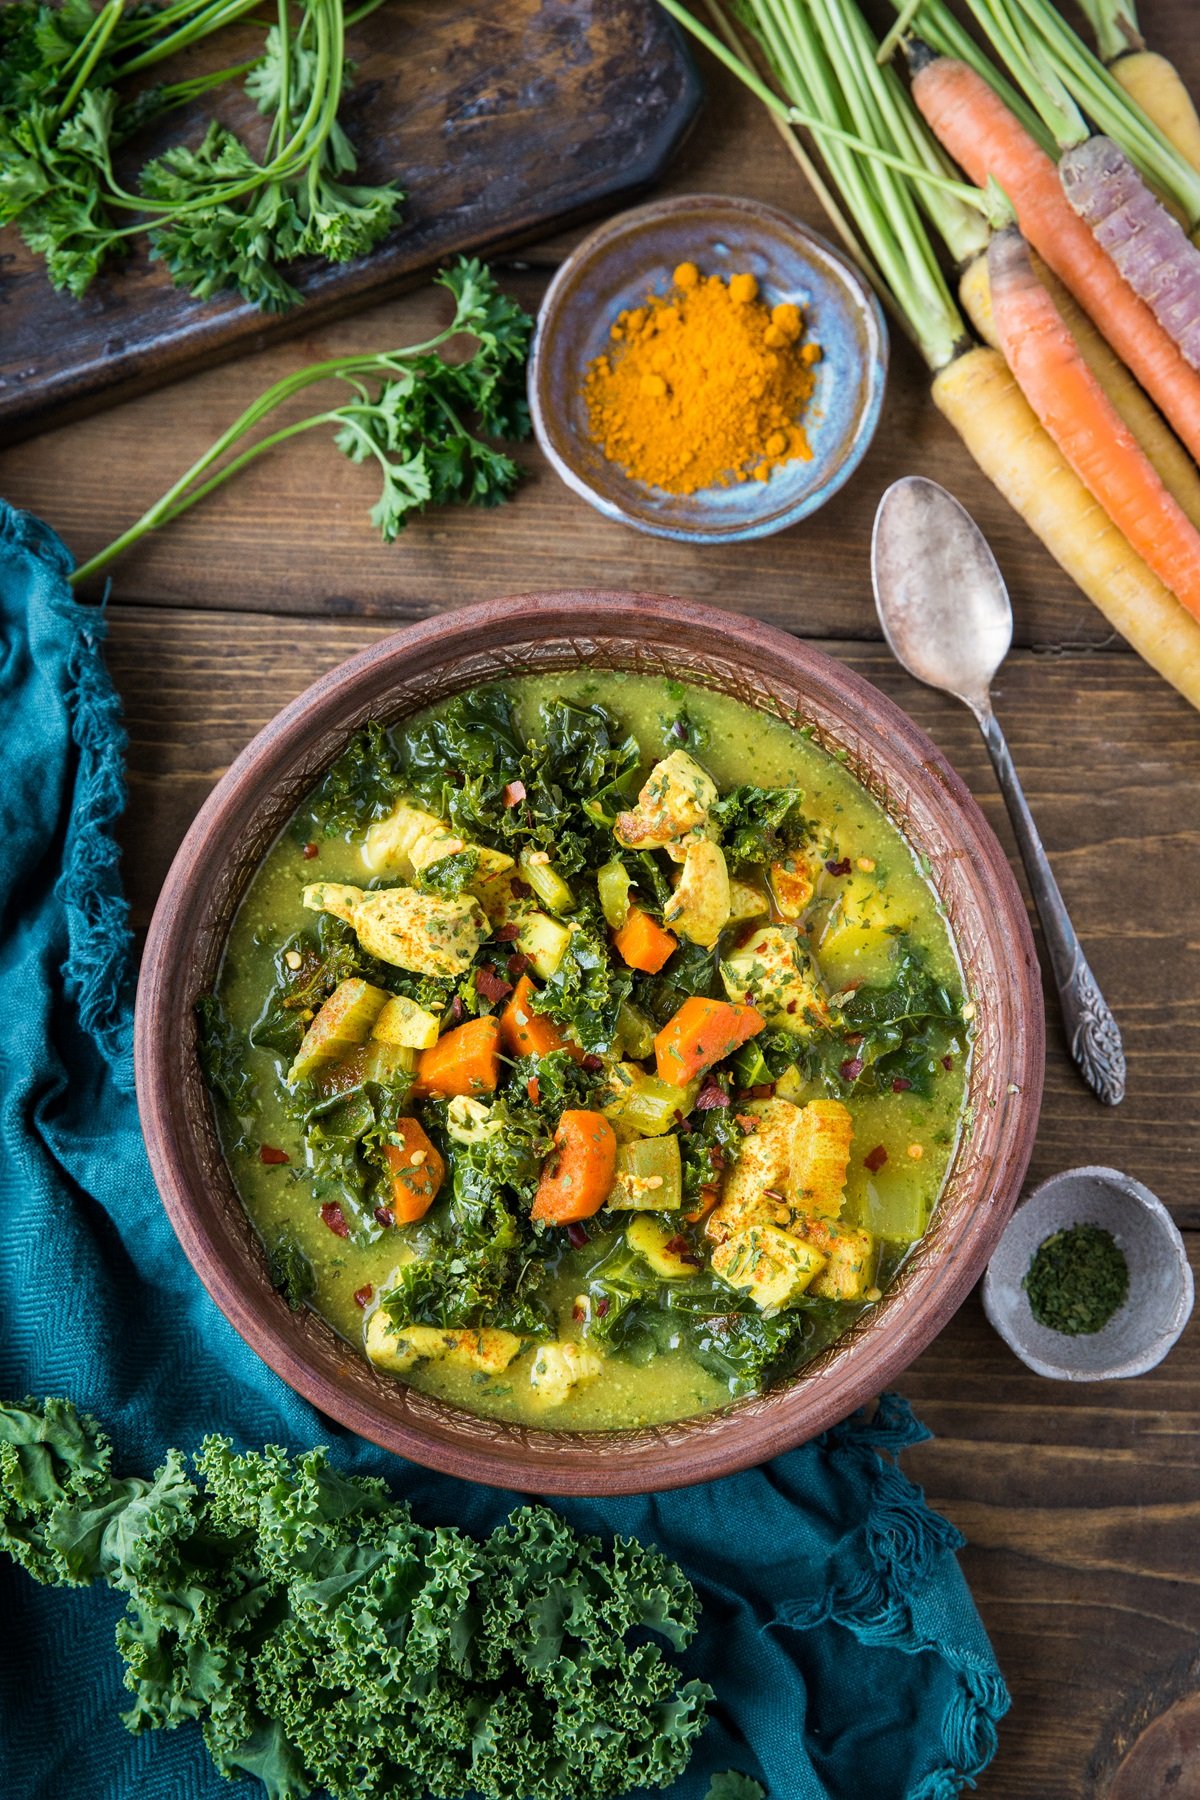 Top down bowl of turmeric chicken soup on a wood background with a fresh kale leaf to the side, saucer of ground turmeric, and a blue napkin, ready to eat.